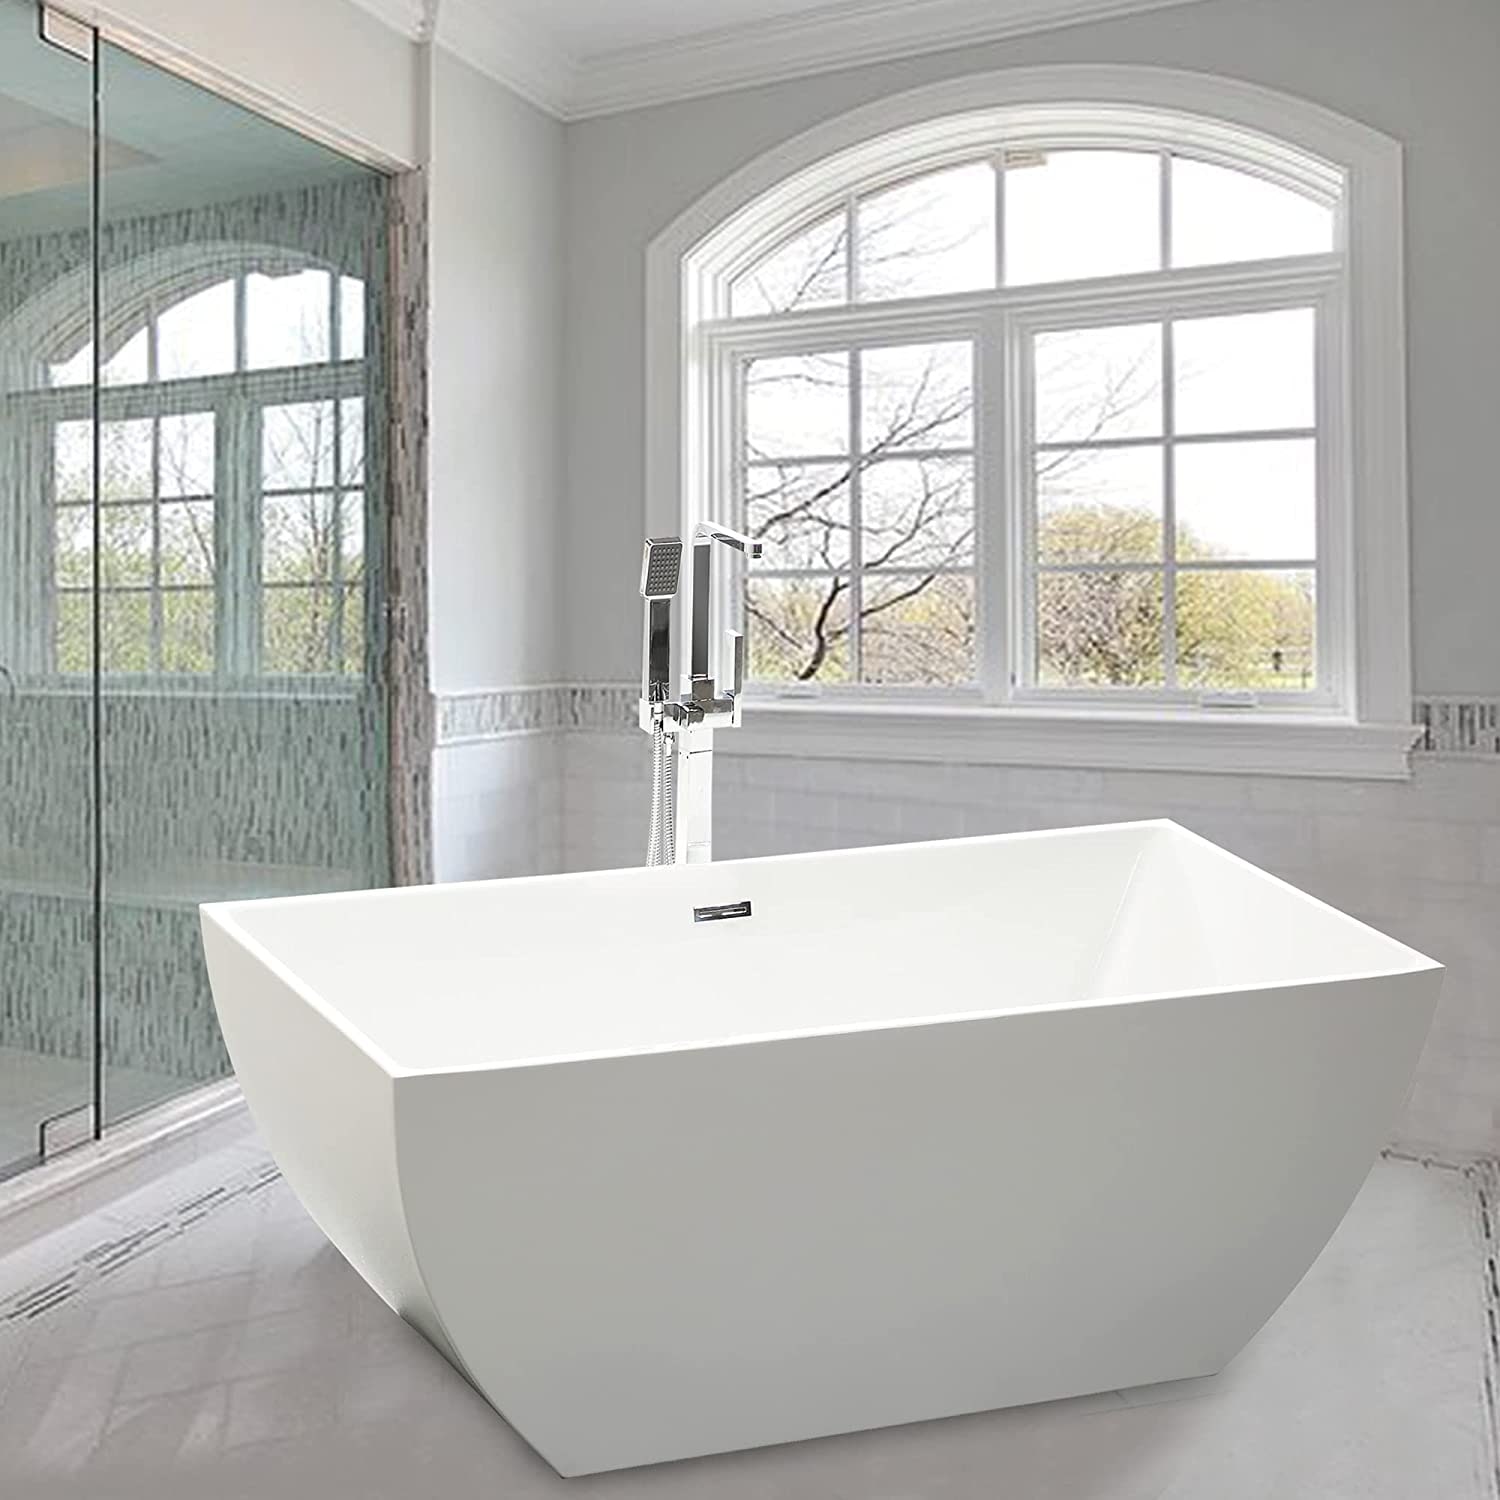 https://ak1.ostkcdn.com/images/products/is/images/direct/0565ab7128fab360fa7f41b16e432797511541bd/Vanity-Art-59%22-Freestanding-Acrylic-Bathtub-Modern-Stand-Alone-Soaking-Tub-with-Chrome-Finish-Slotted-Overflow-%26-Pop-up-Drain.jpg